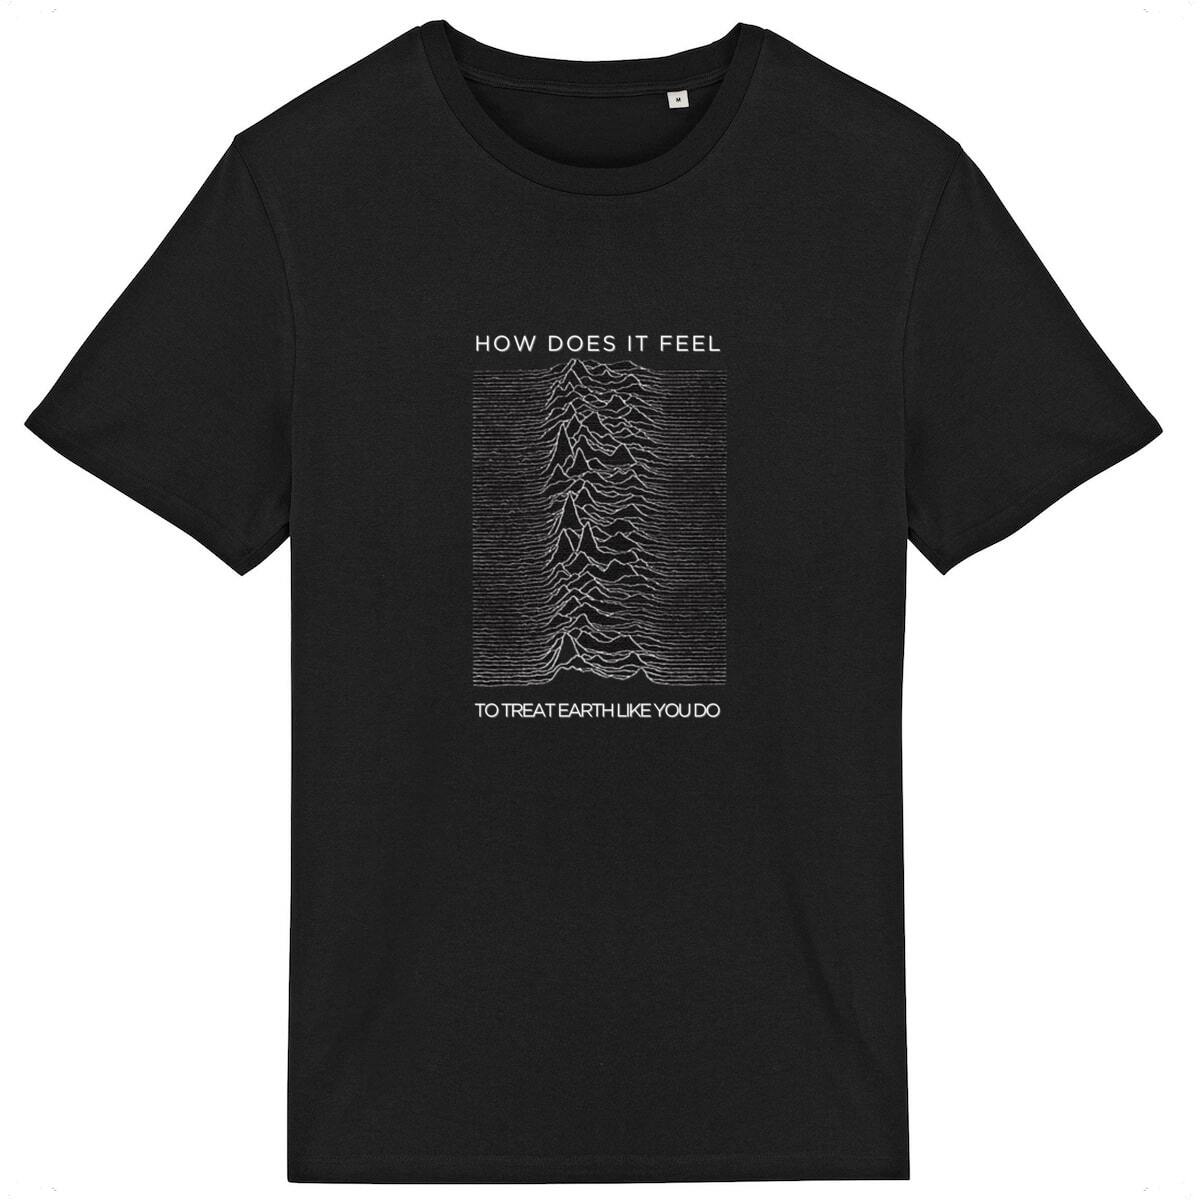 Joy Division Tshirt, Joy Division Album Art, How does it feel to treat me like you do tshirt, t shirts made to order, made-to-order clothing, Holding Court Inc, Courtney Barriger, Organic cotton clothes for women, Organic Cotton Clothing for Women, Organic Cotton Tank Tops, Cotton Organic T Shirts, Organic Cotton T Shirt, Band Tees, Vintage Tees, Rolling Stones Bomber Jacket, Stoned Girls, She's a rainbow, Environmental Slogan Tshirt, Environmental Slogan Tee